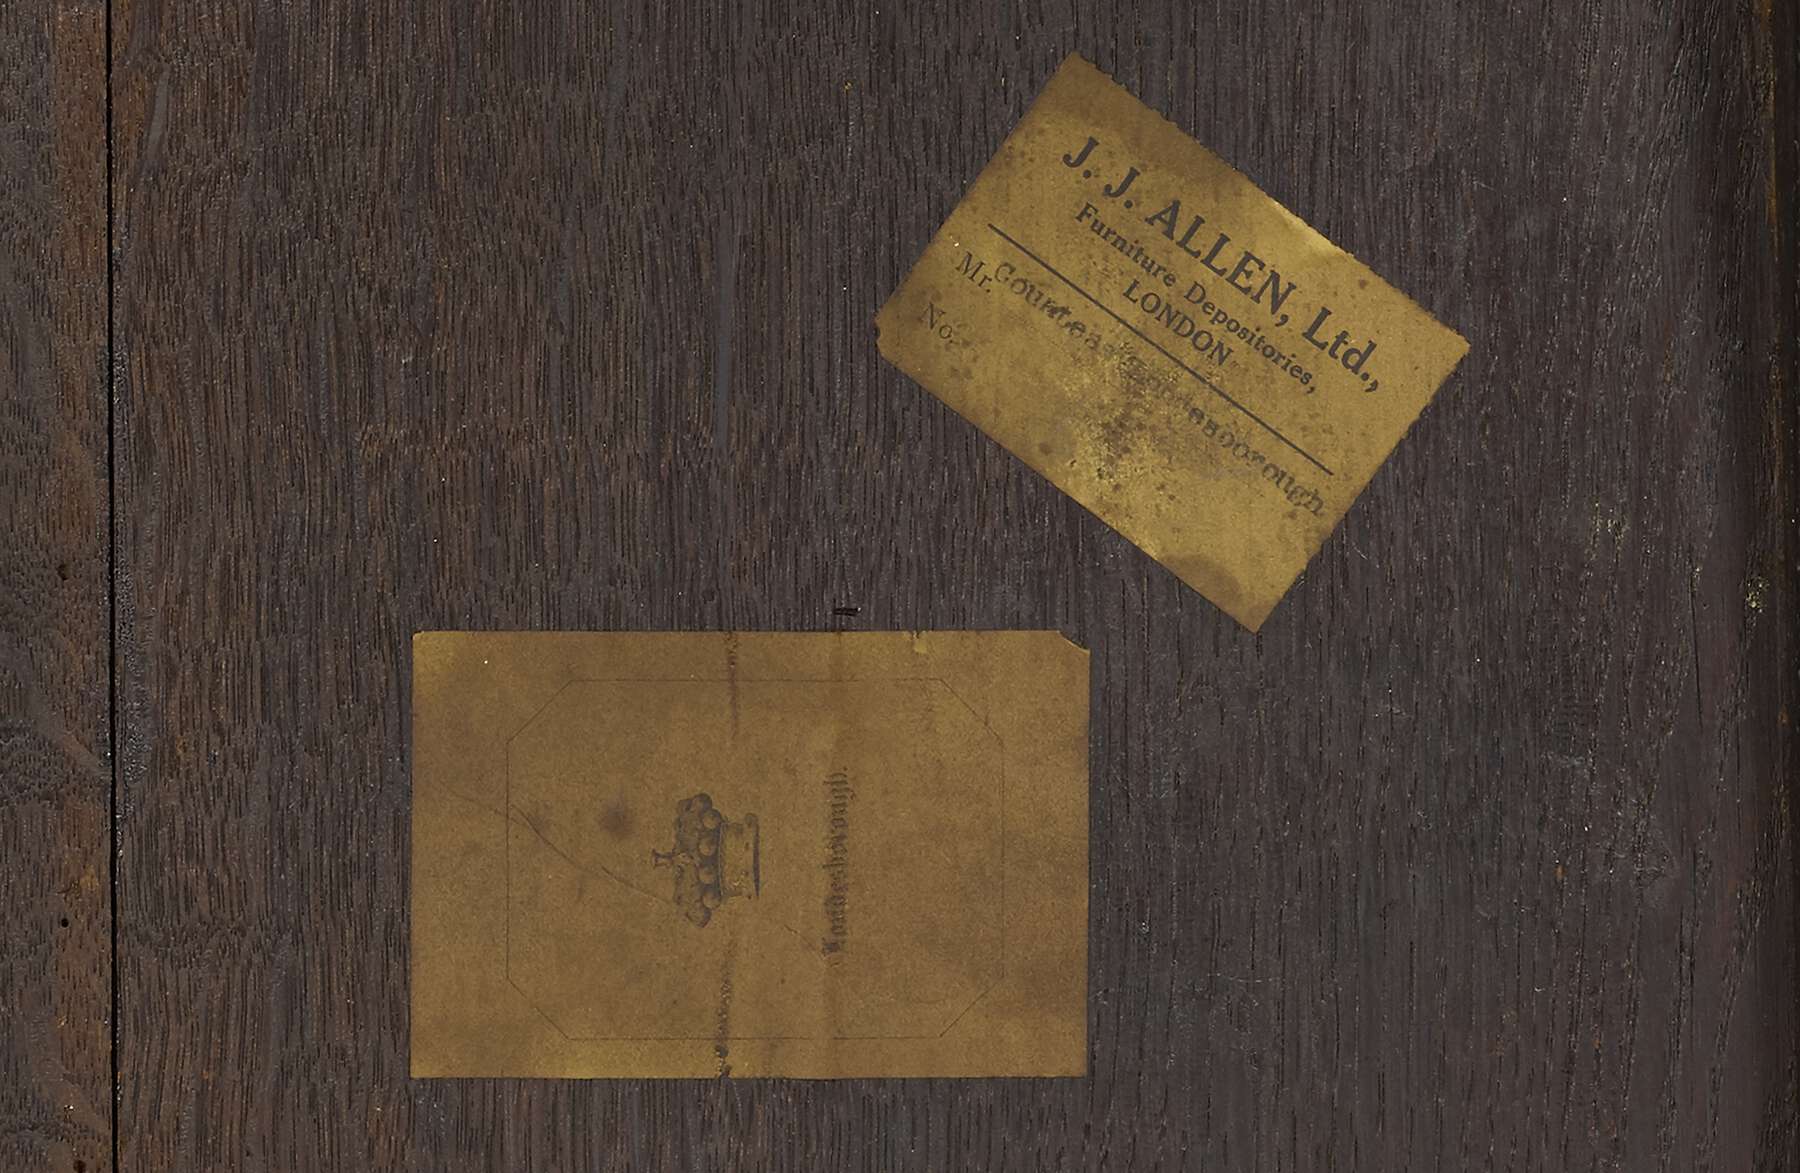 detail of the underside of the table, showing two rectangular paper labels